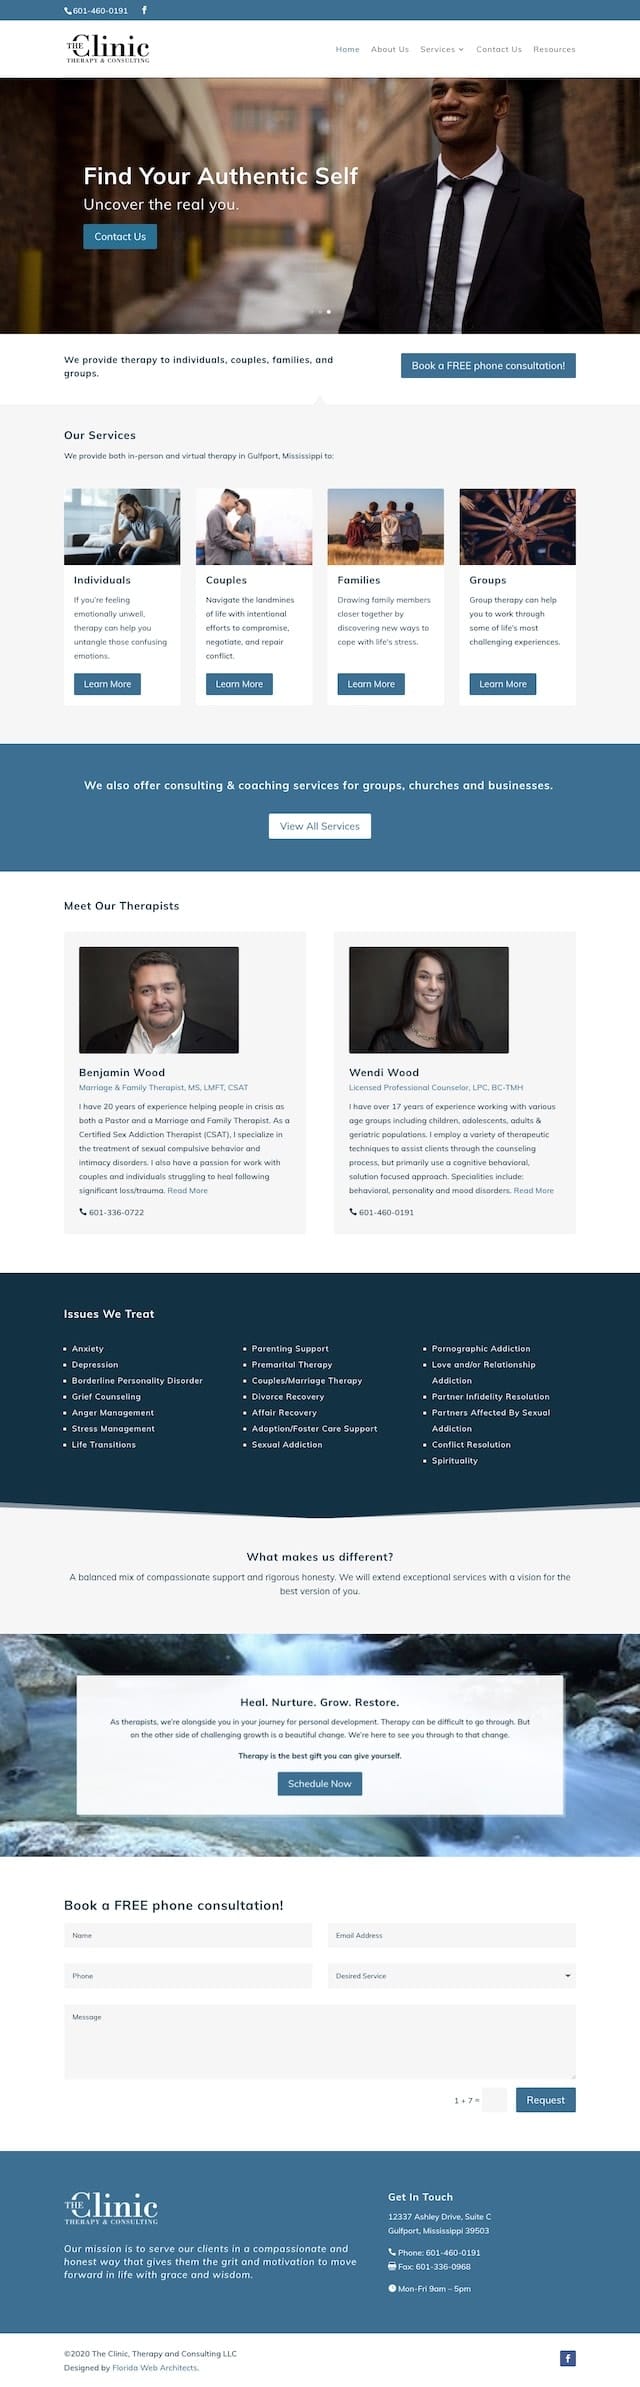 Therapy and Consulting Client Website Design Screenshot